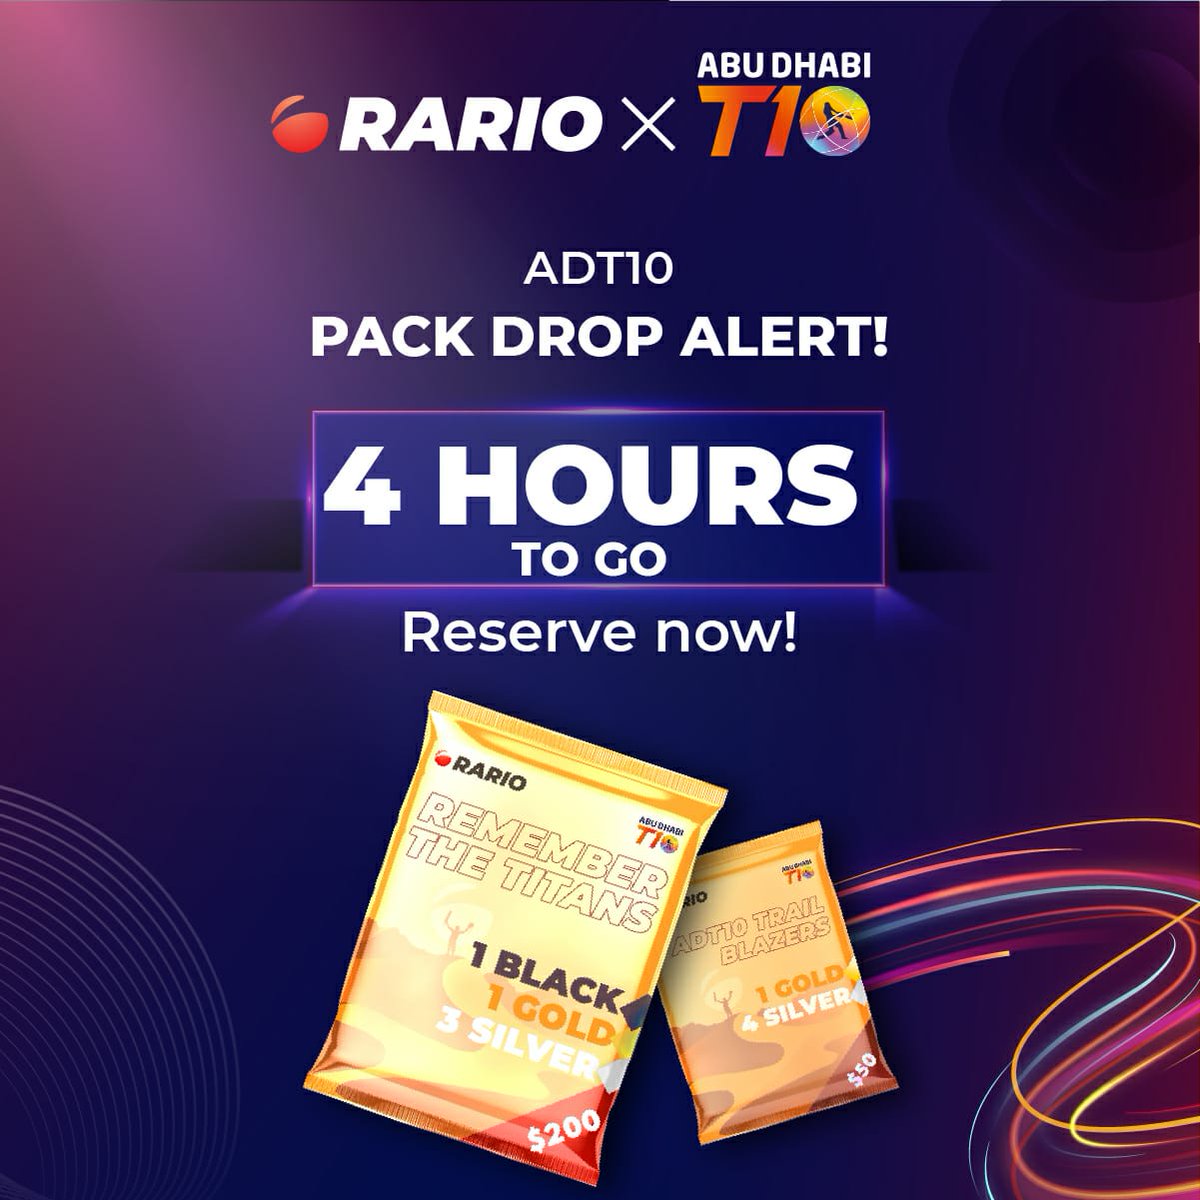 #RarioPackDrop

This is best opportunity to pickup don't late for your rario pickings... and reserve now..